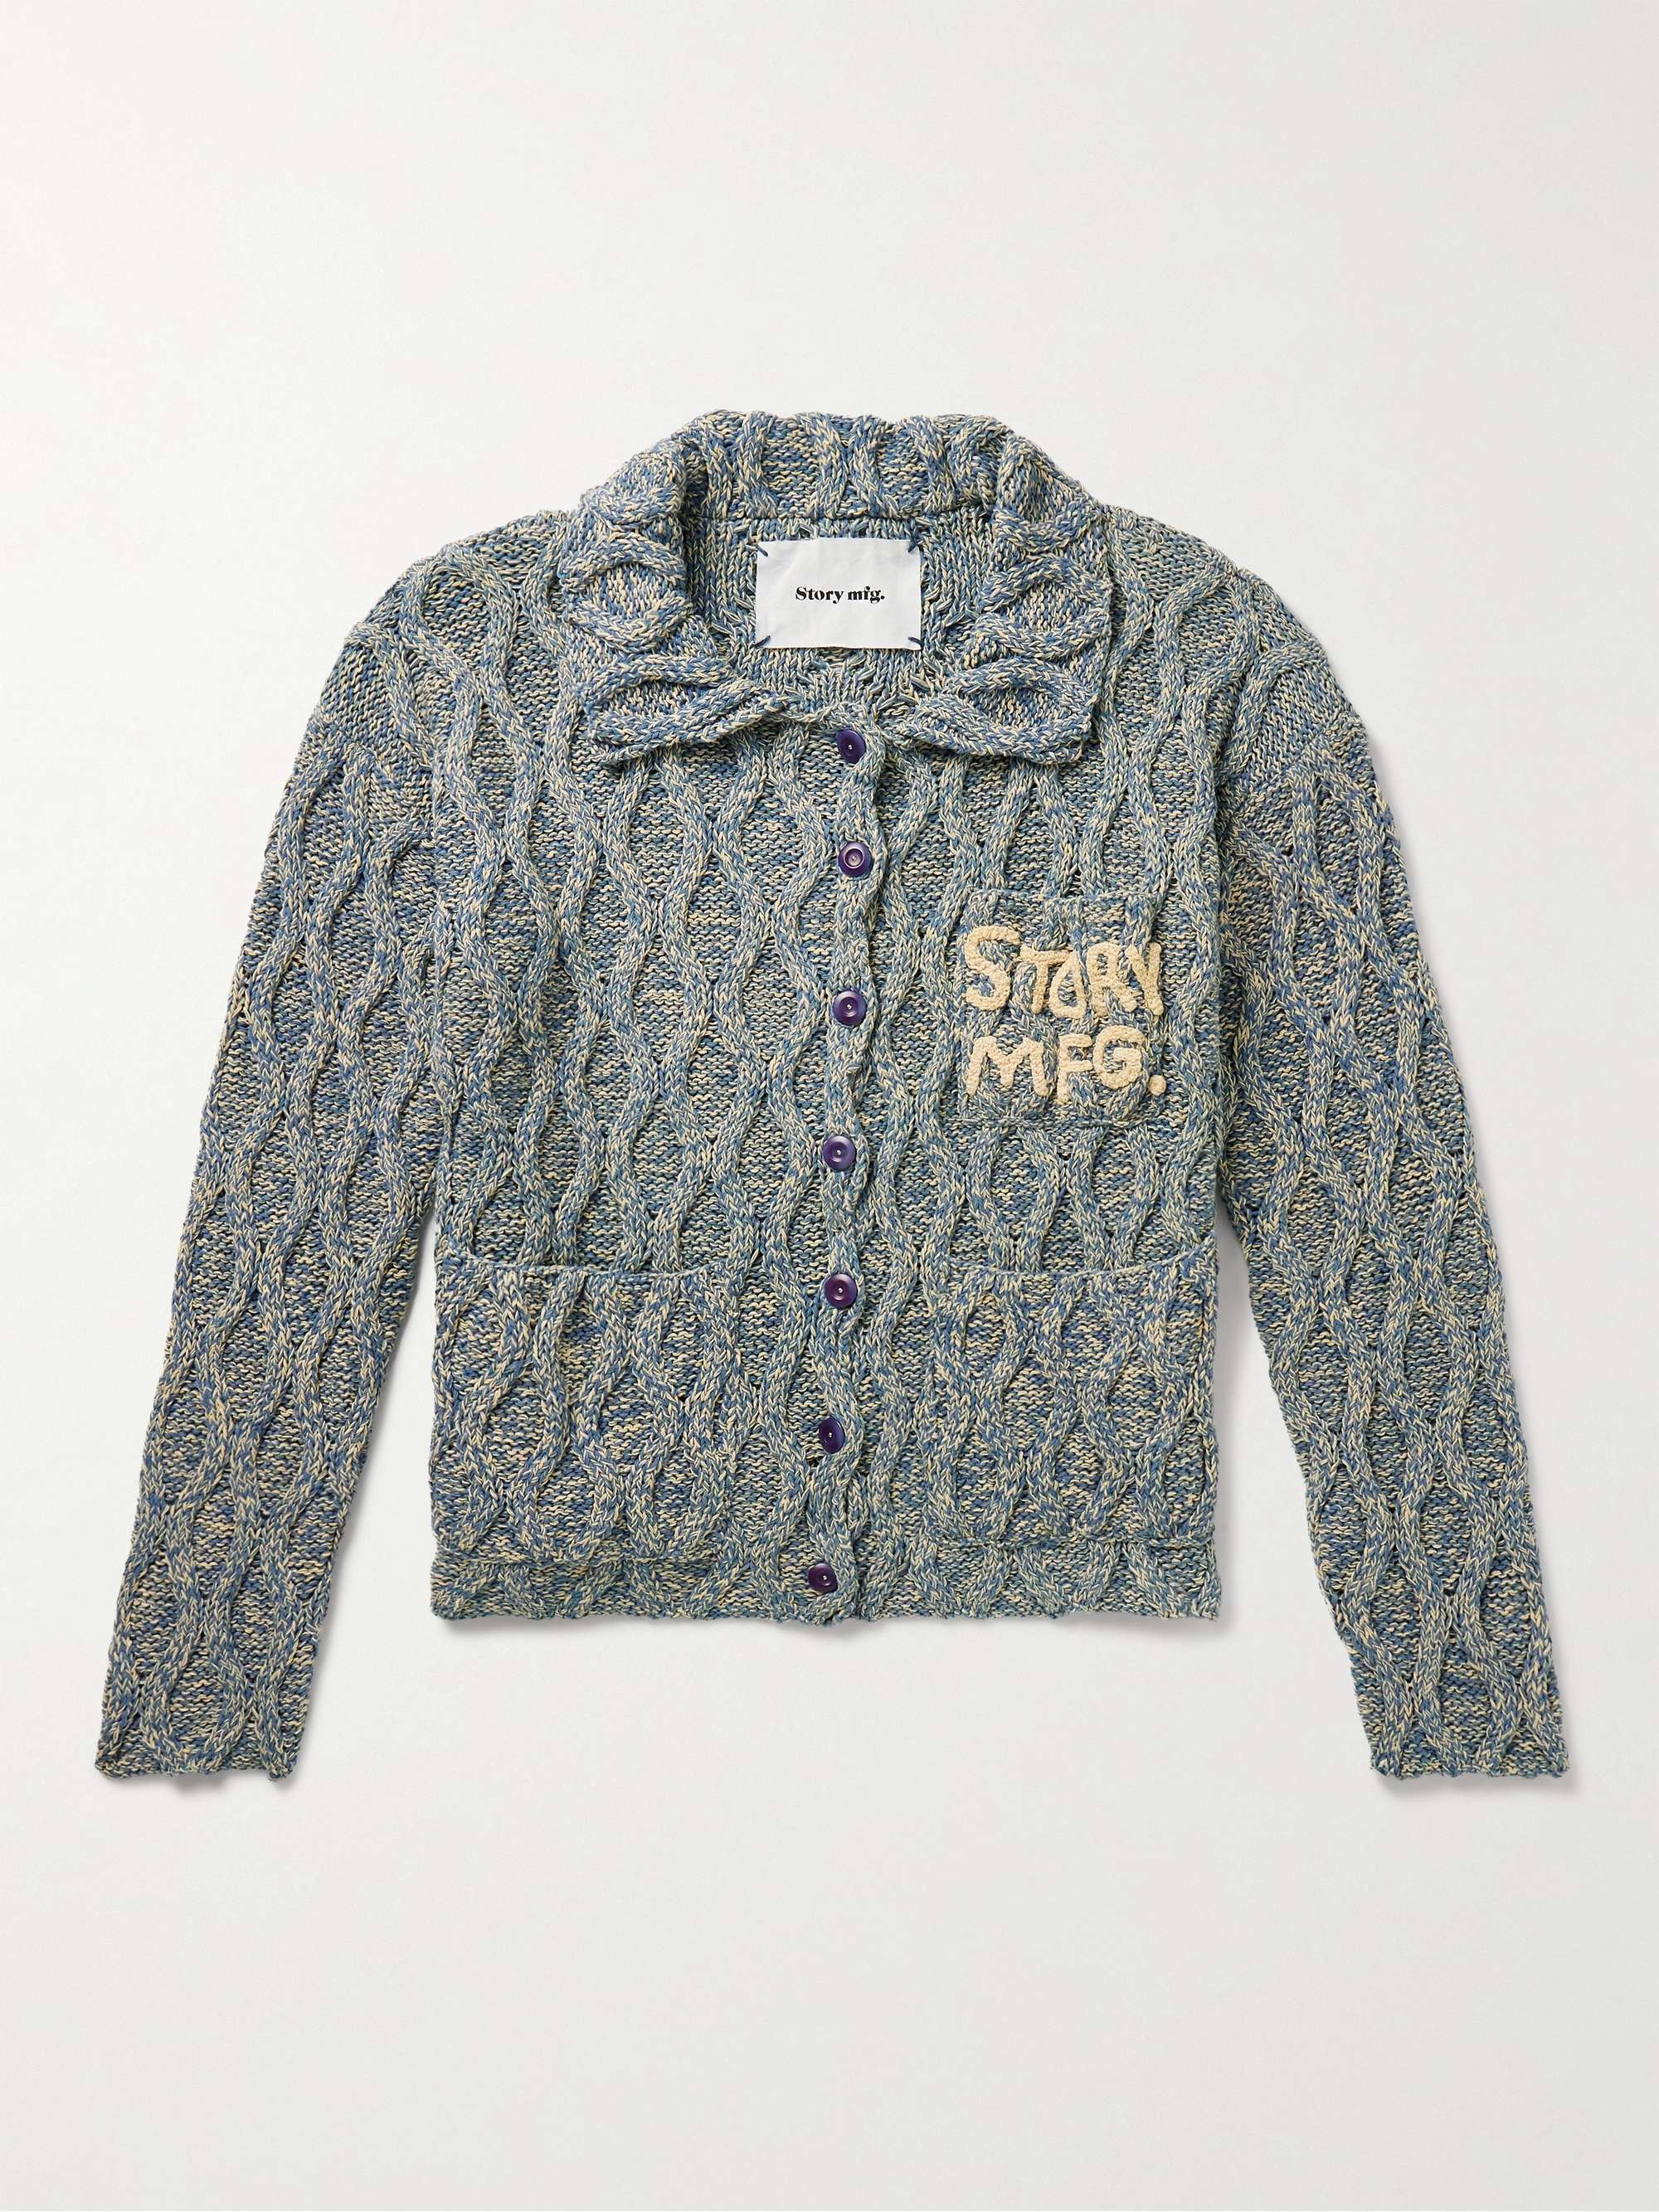 STORY MFG. Grandad Embroidered Cable-Knit Organic Cotton Cardigan